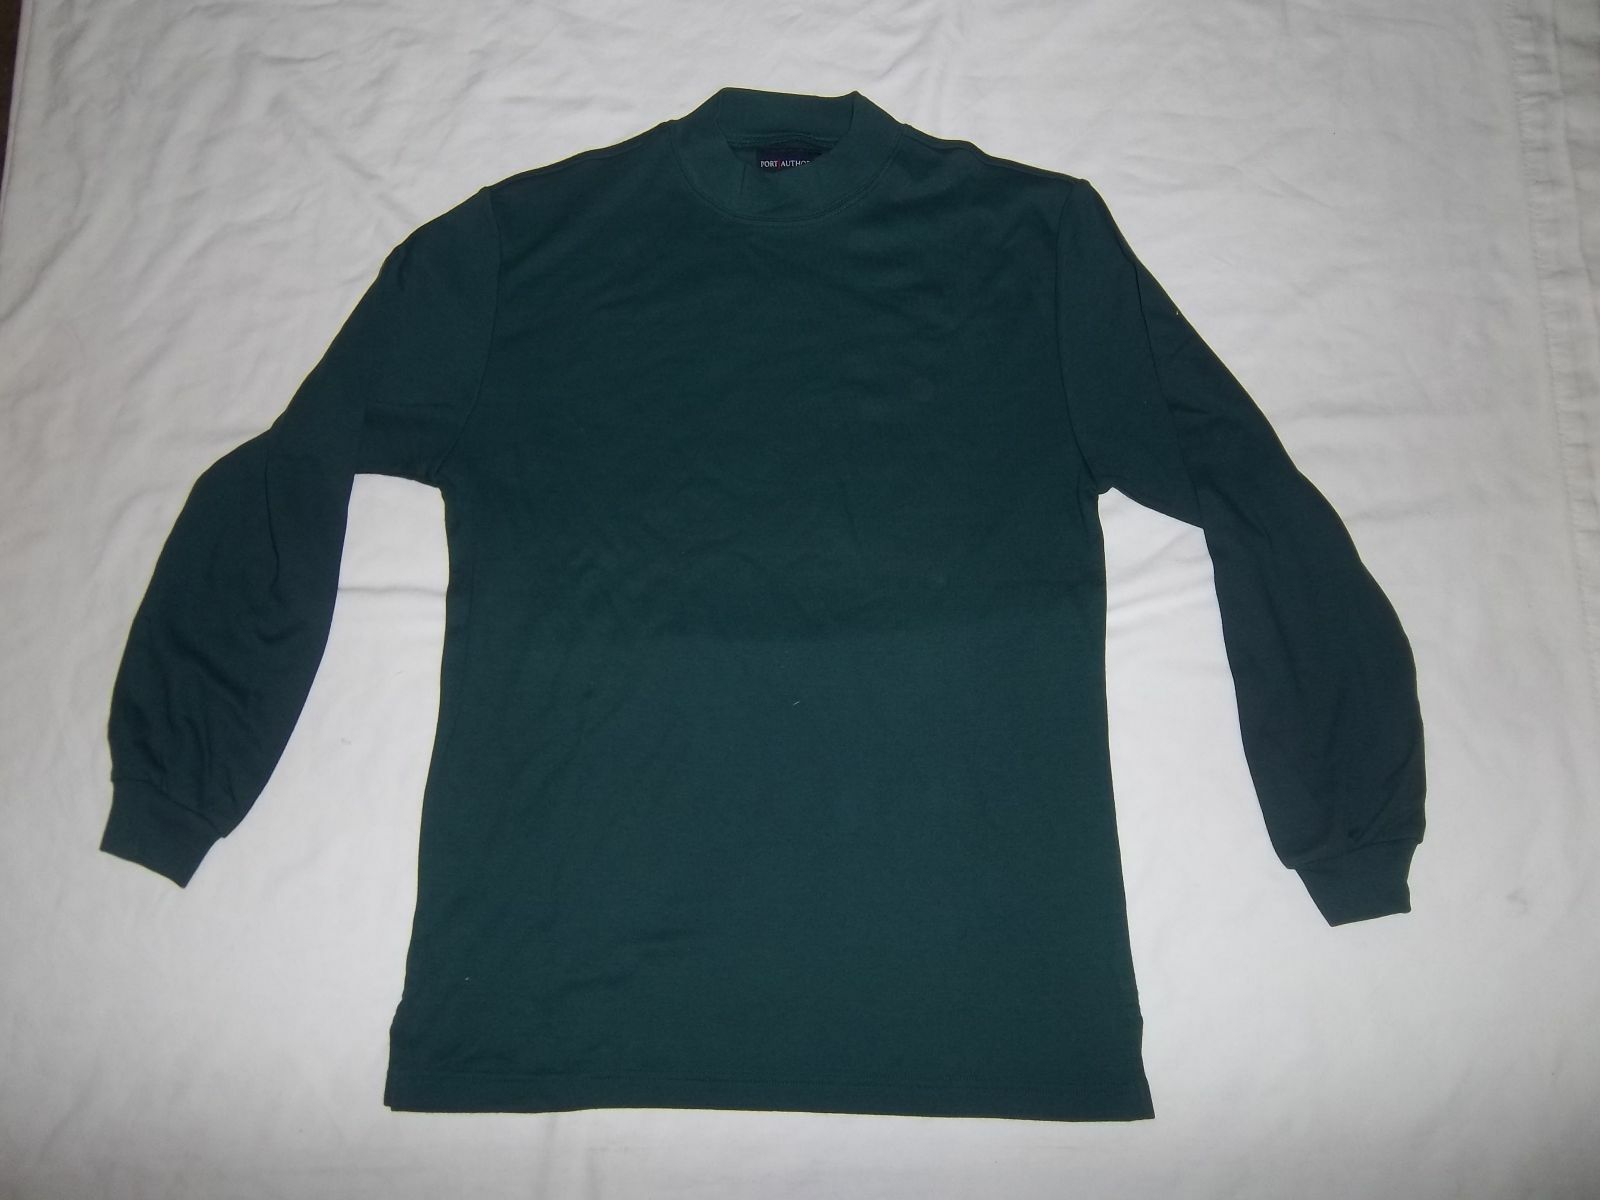 PORT AUTHORITY MOCK TURTLE NECK LONG SLEEVE SHIRT (VARIOUS SIZES AND COLORS)